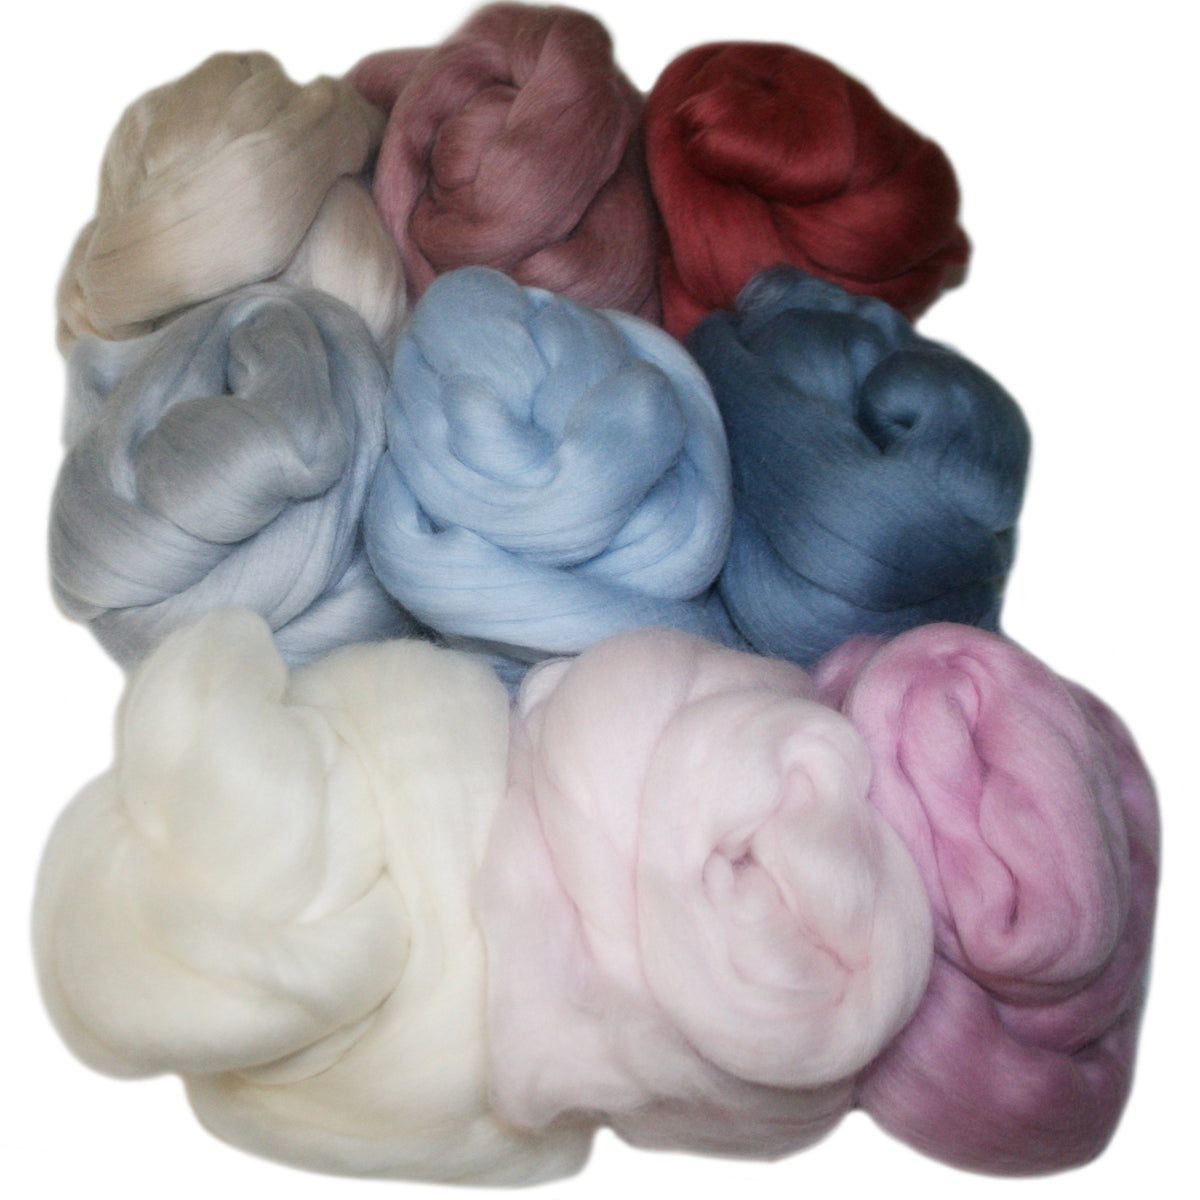 Coloured Wool Top Box of 9 - Pretty Pastels